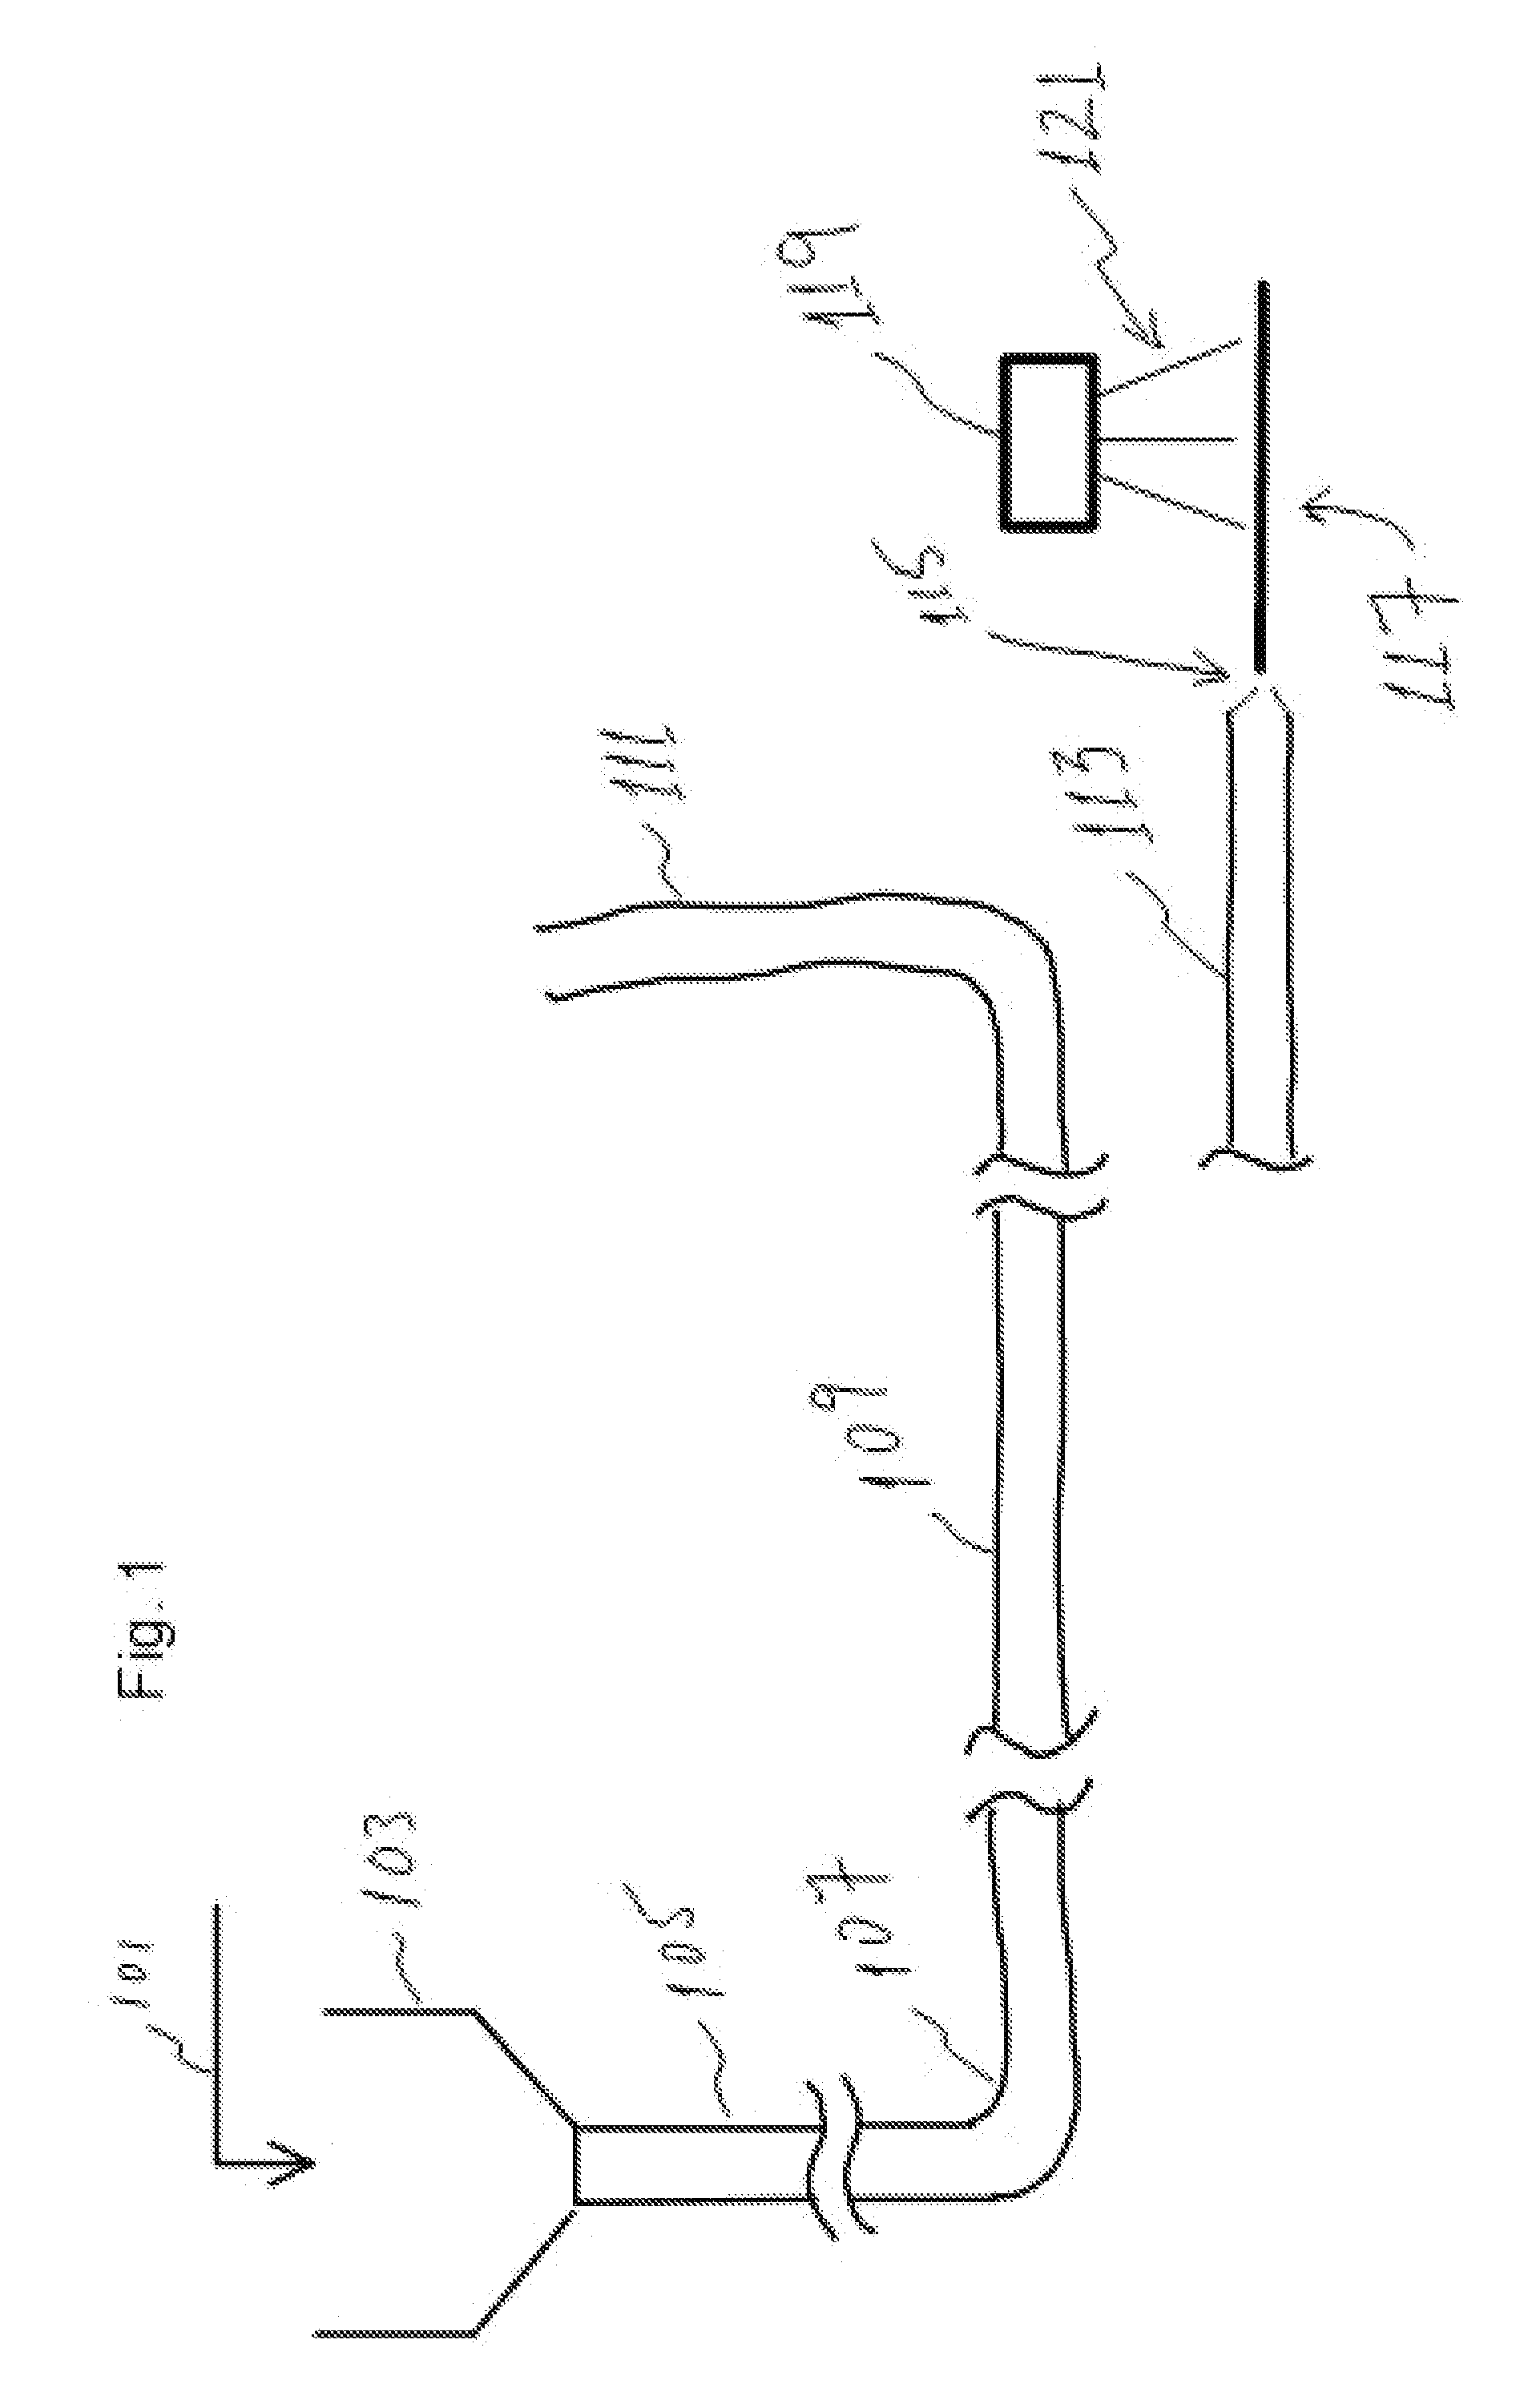 Recycled food processing, products therefrom, and devices useful therein